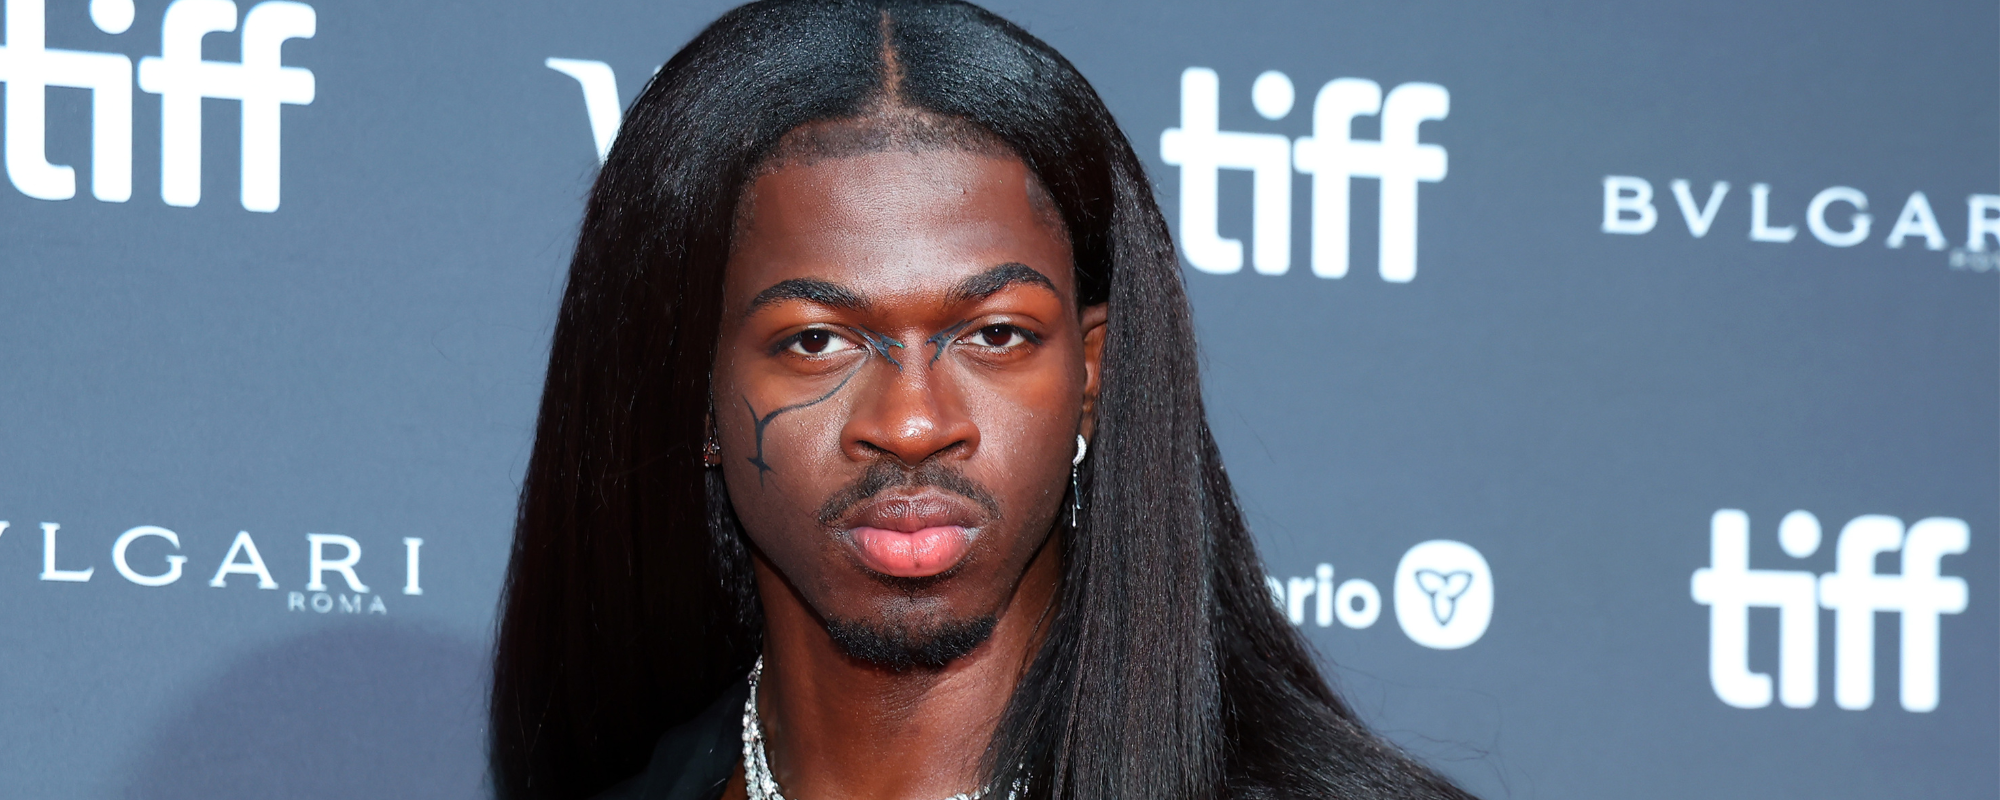 Lil Nas X Documentary Premiere Delayed by ‘Threat’